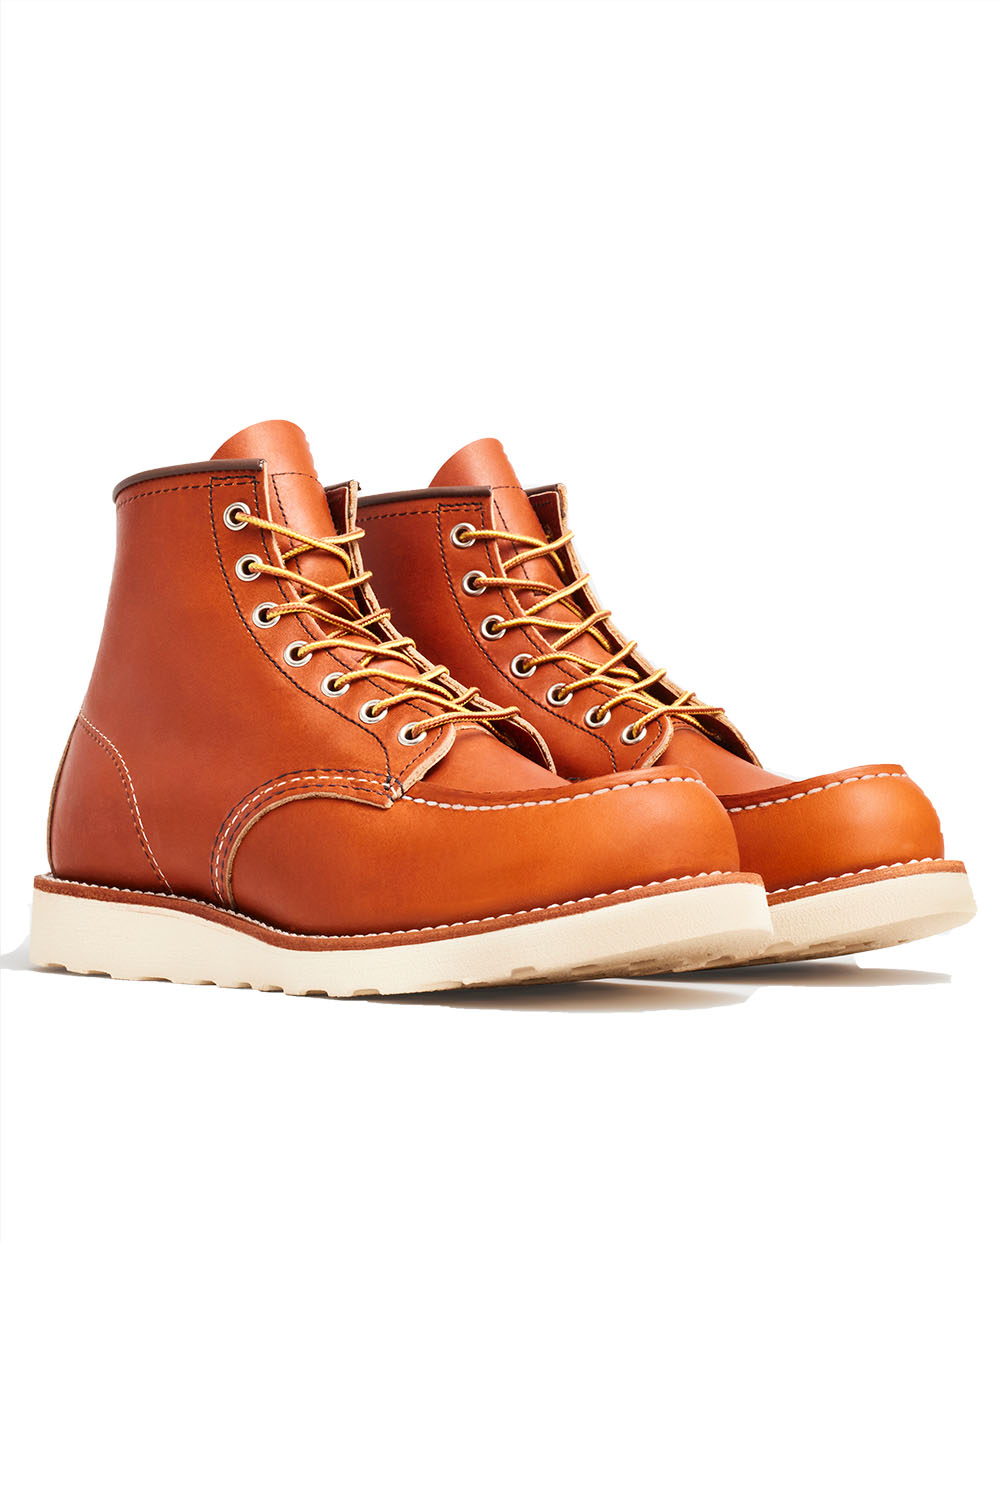 Red Wing - 6 Inch Moc Toe - Oro Legacy - Profile